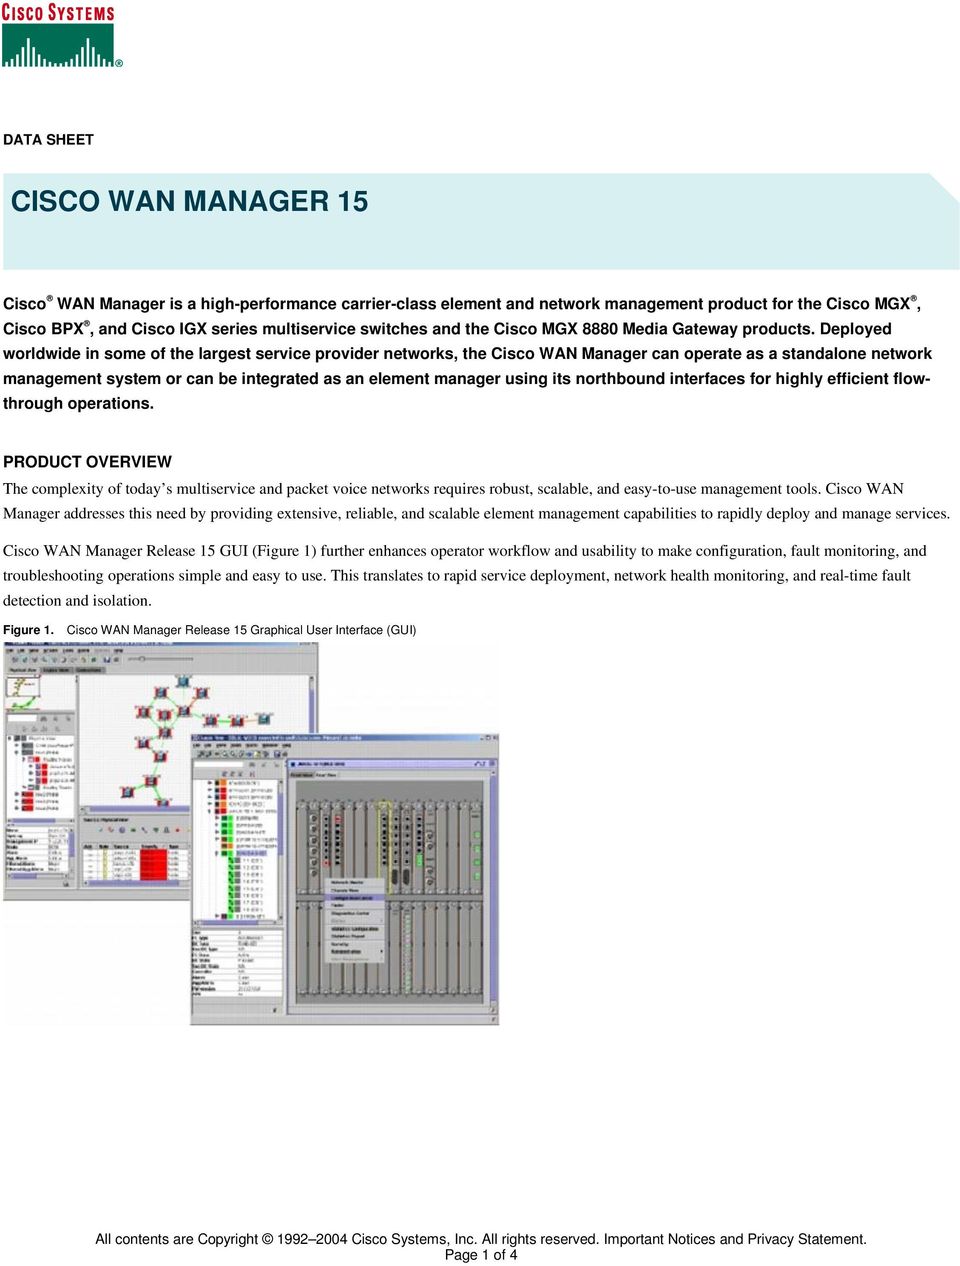 Deployed worldwide in some of the largest service provider networks, the Cisco WAN Manager can operate as a standalone network management system or can be integrated as an element manager using its